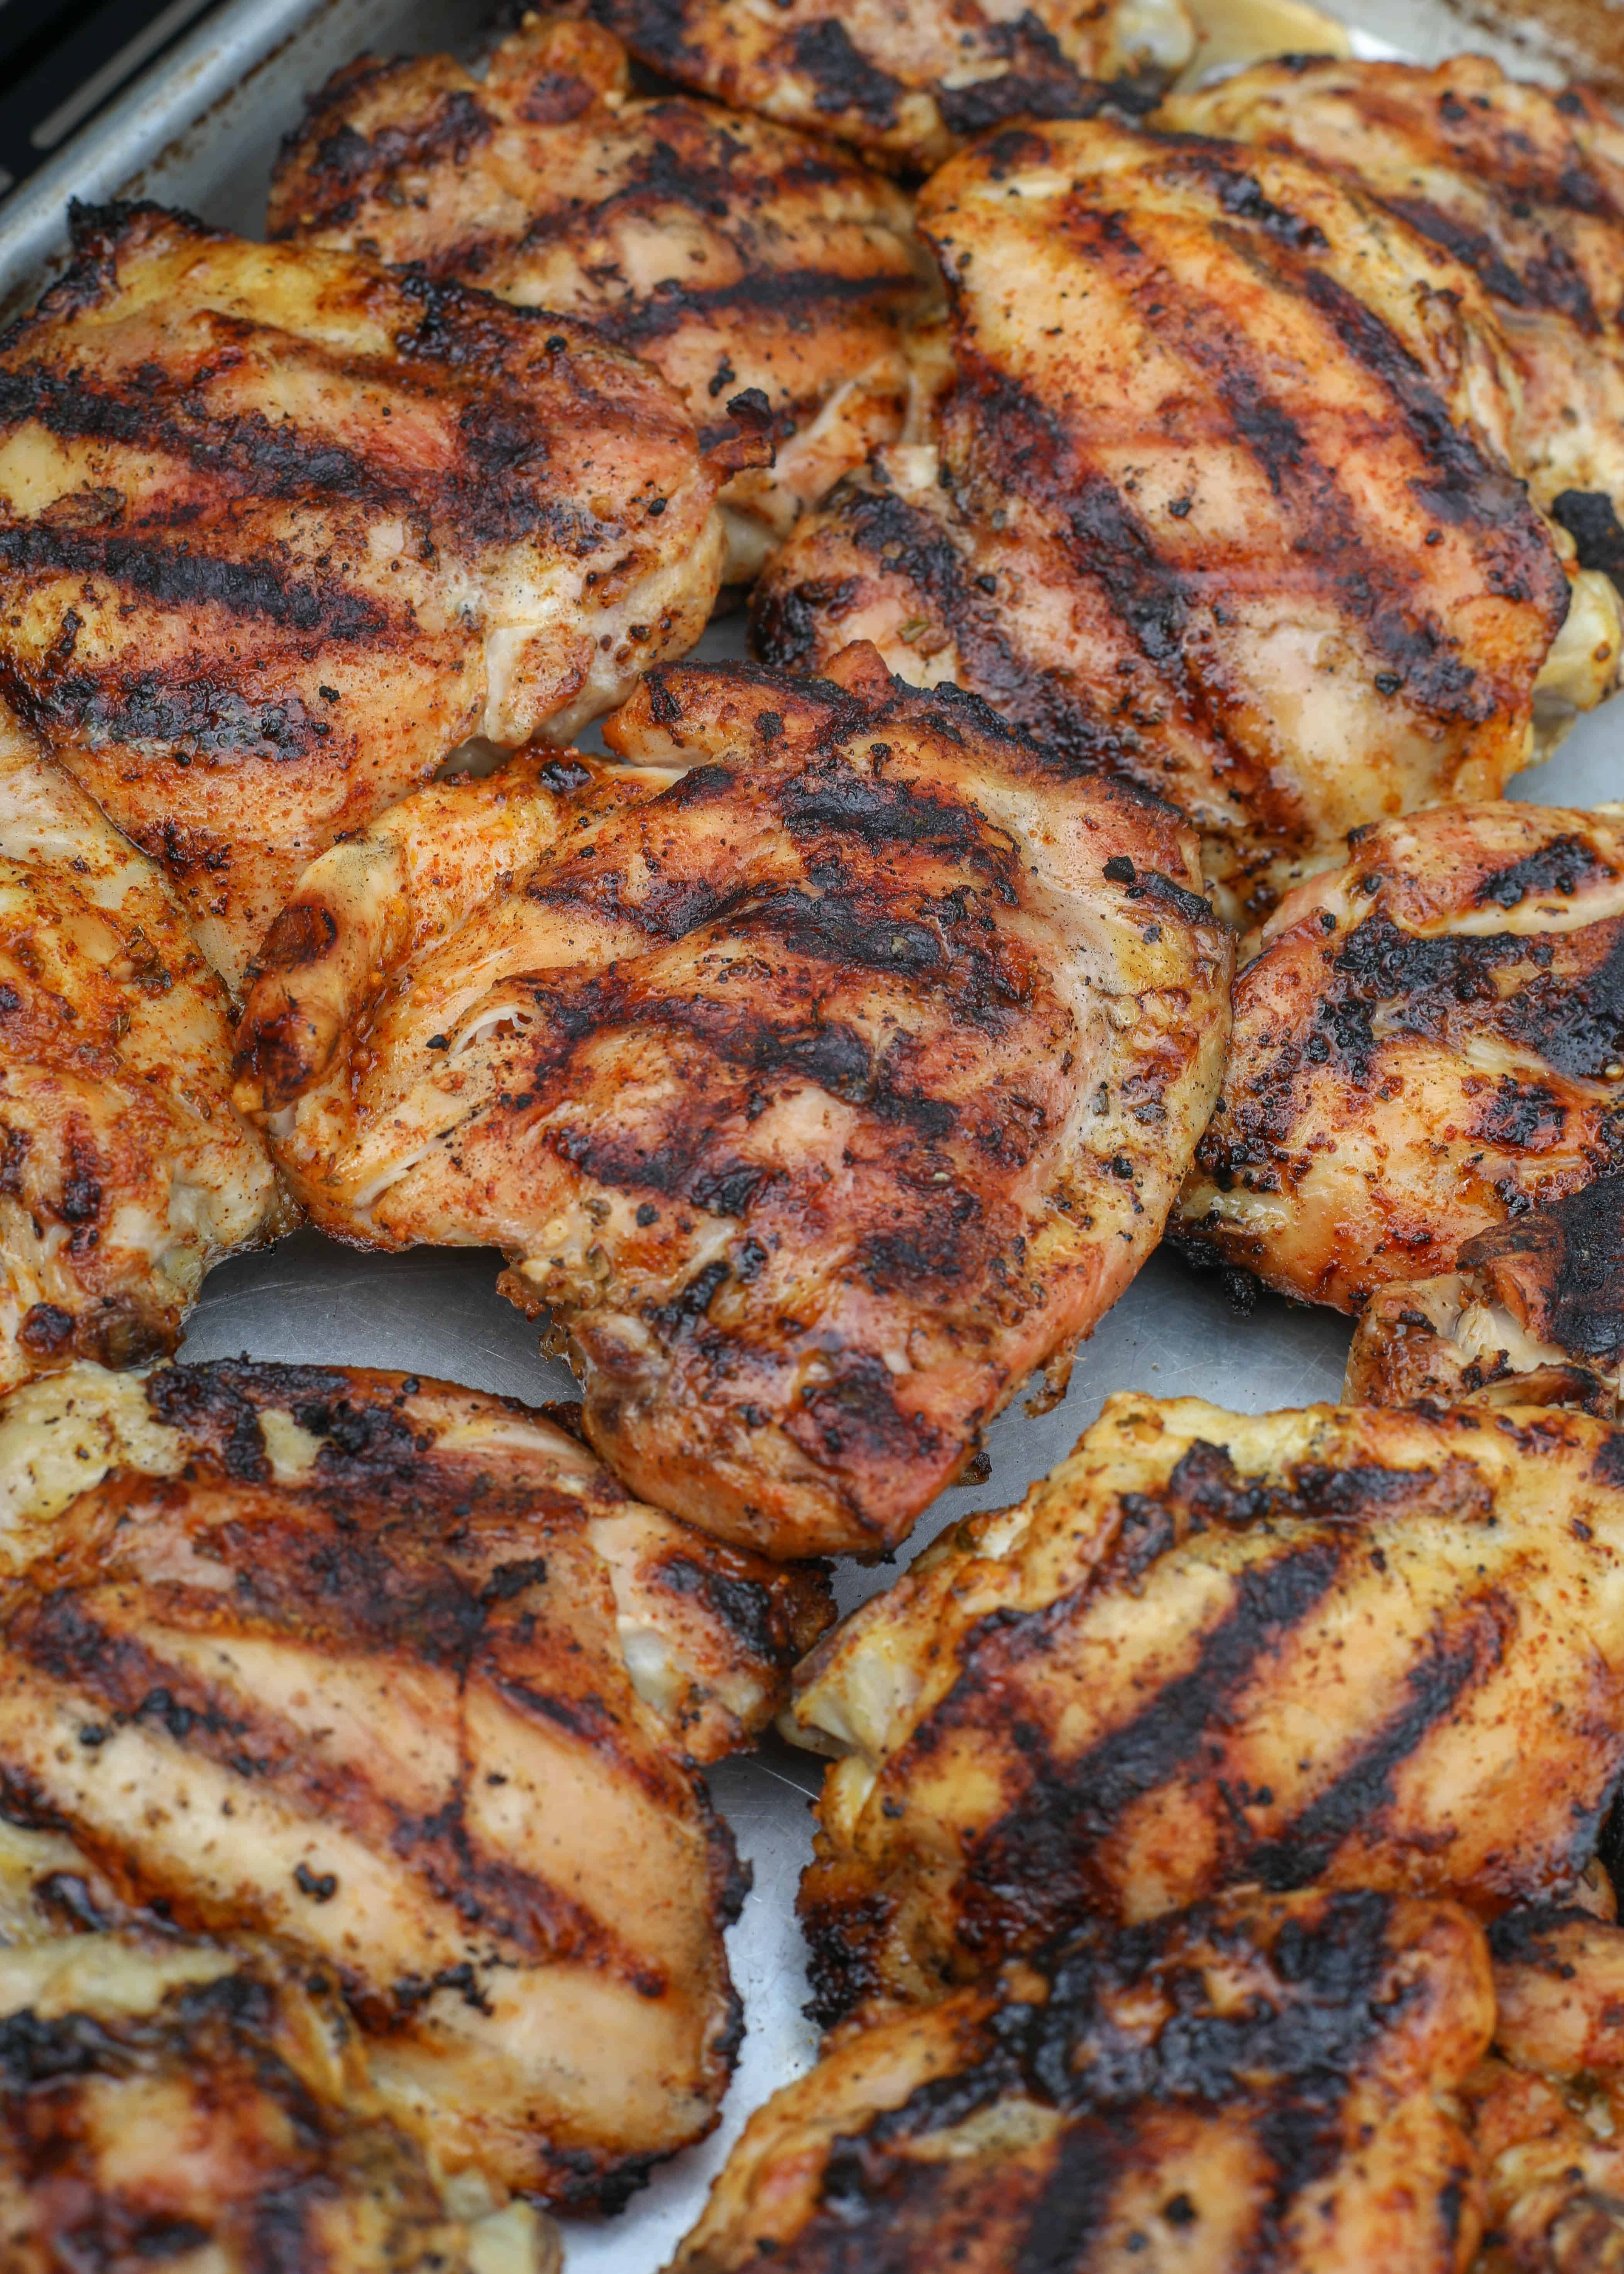 How to grill chicken